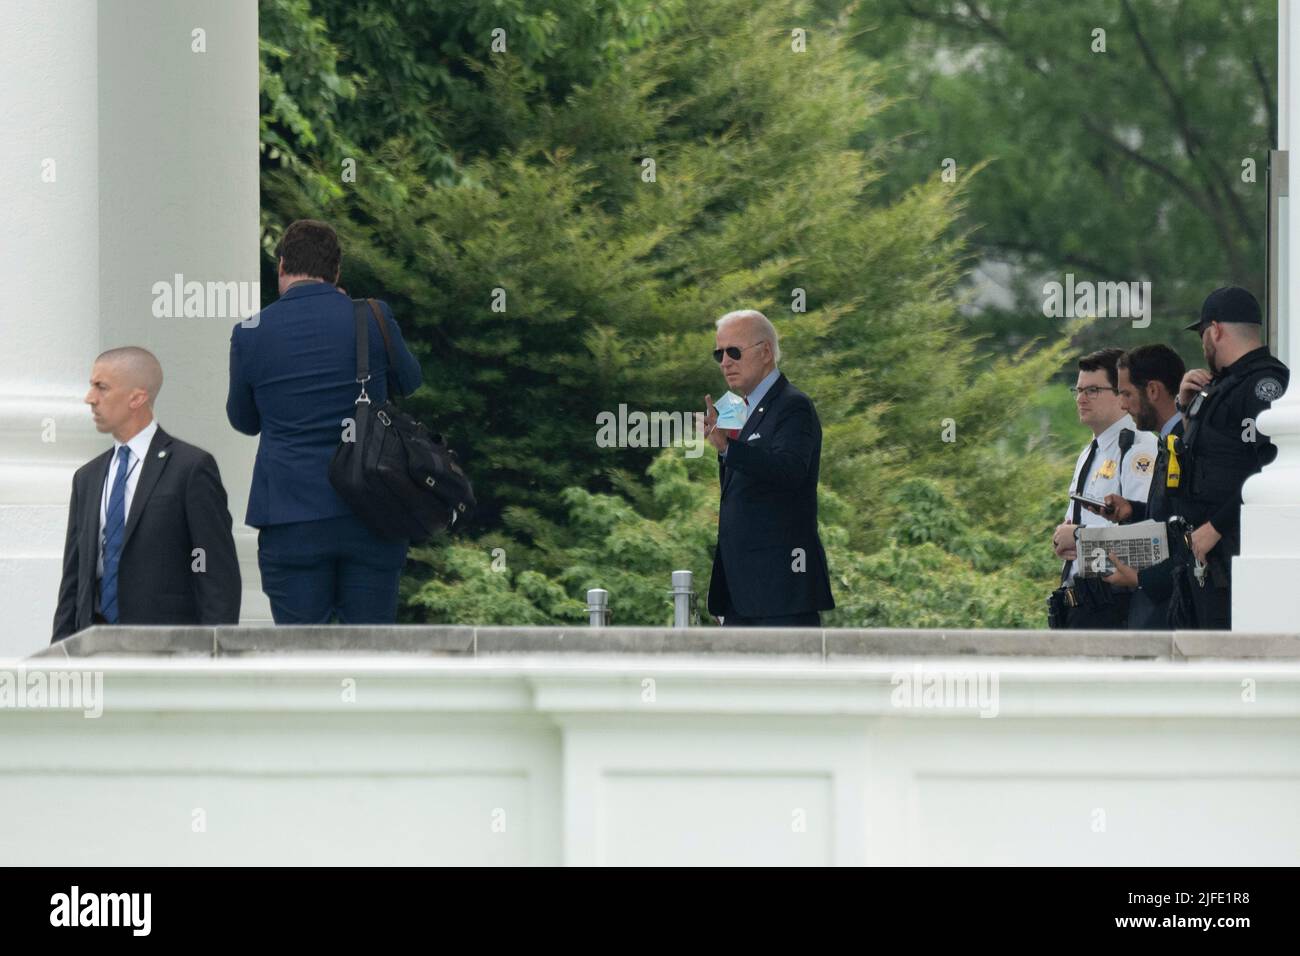 United States President Joe Biden departs the White House in Washington, DC, headed for Camp David, July 1, 2022. Credit: Chris Kleponis/CNP /MediaPunch Stock Photo